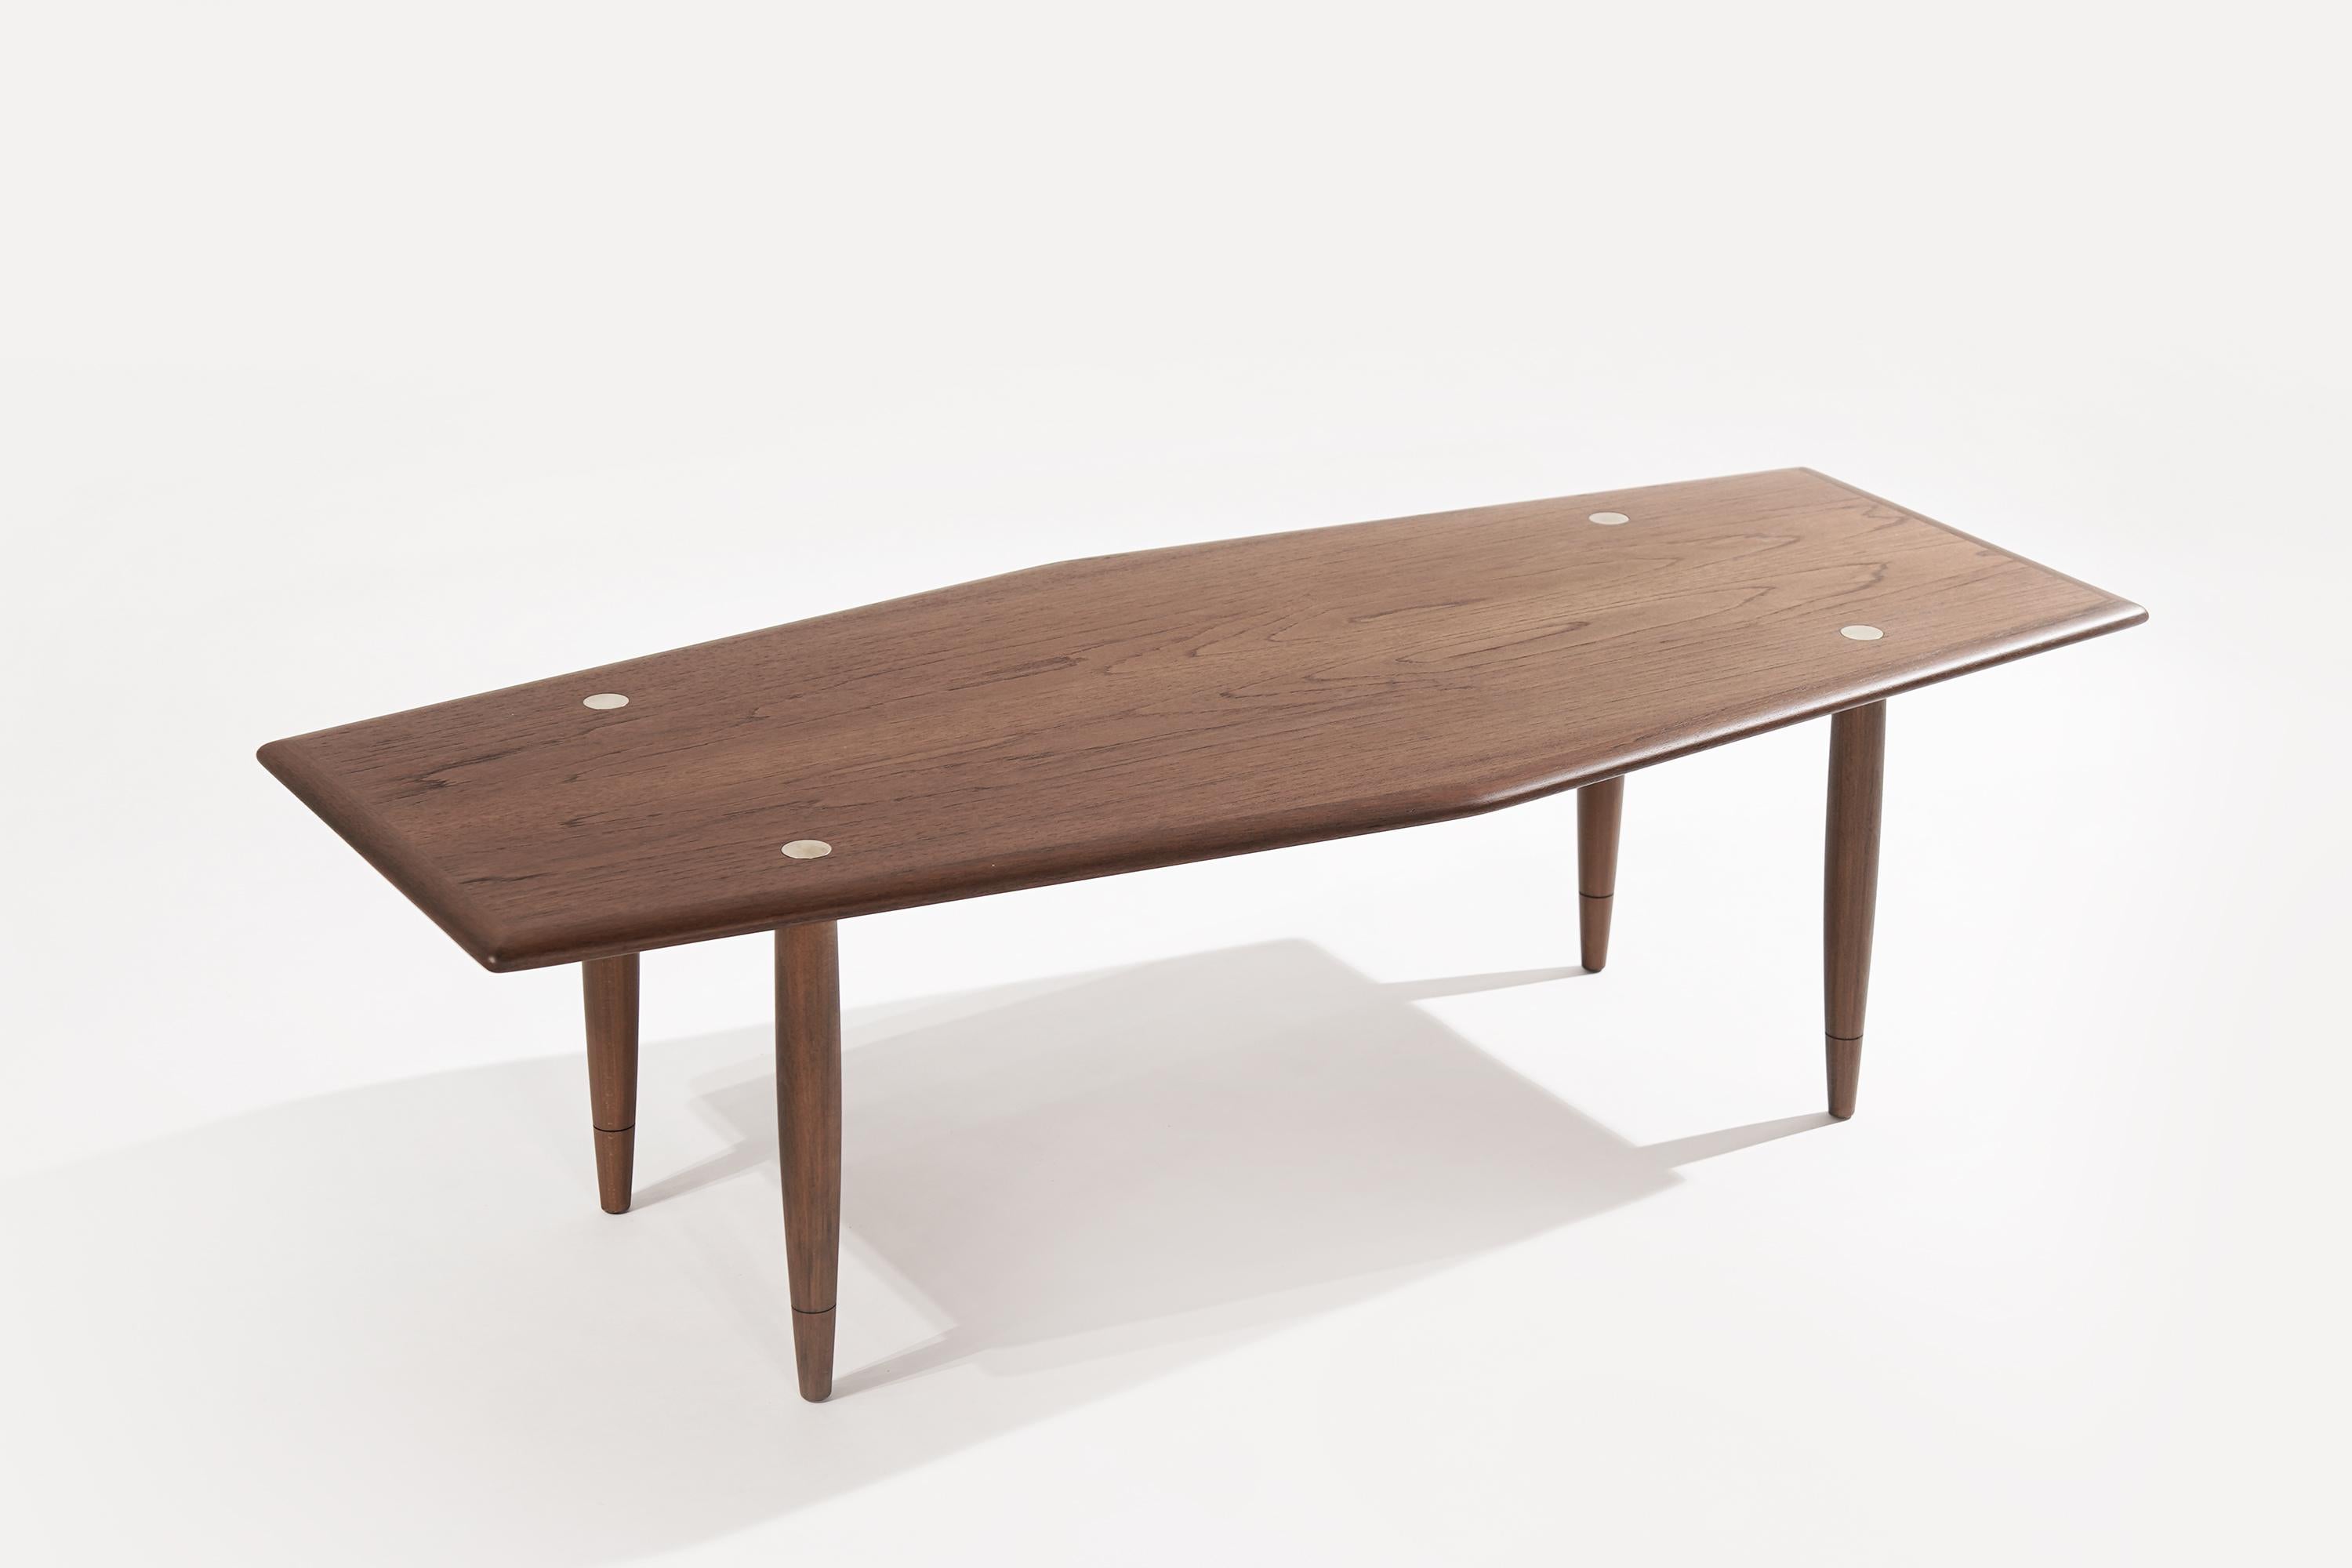 An exquisitely rare coffee table, executed in teak designed by Yngve Ekström for Dux, featuring brass accents. Completely restored.

Other designers from this period include Finn Juhl, Vladimir Kagan, Hans Wegner, Gio Ponti, and Ico Parisi.